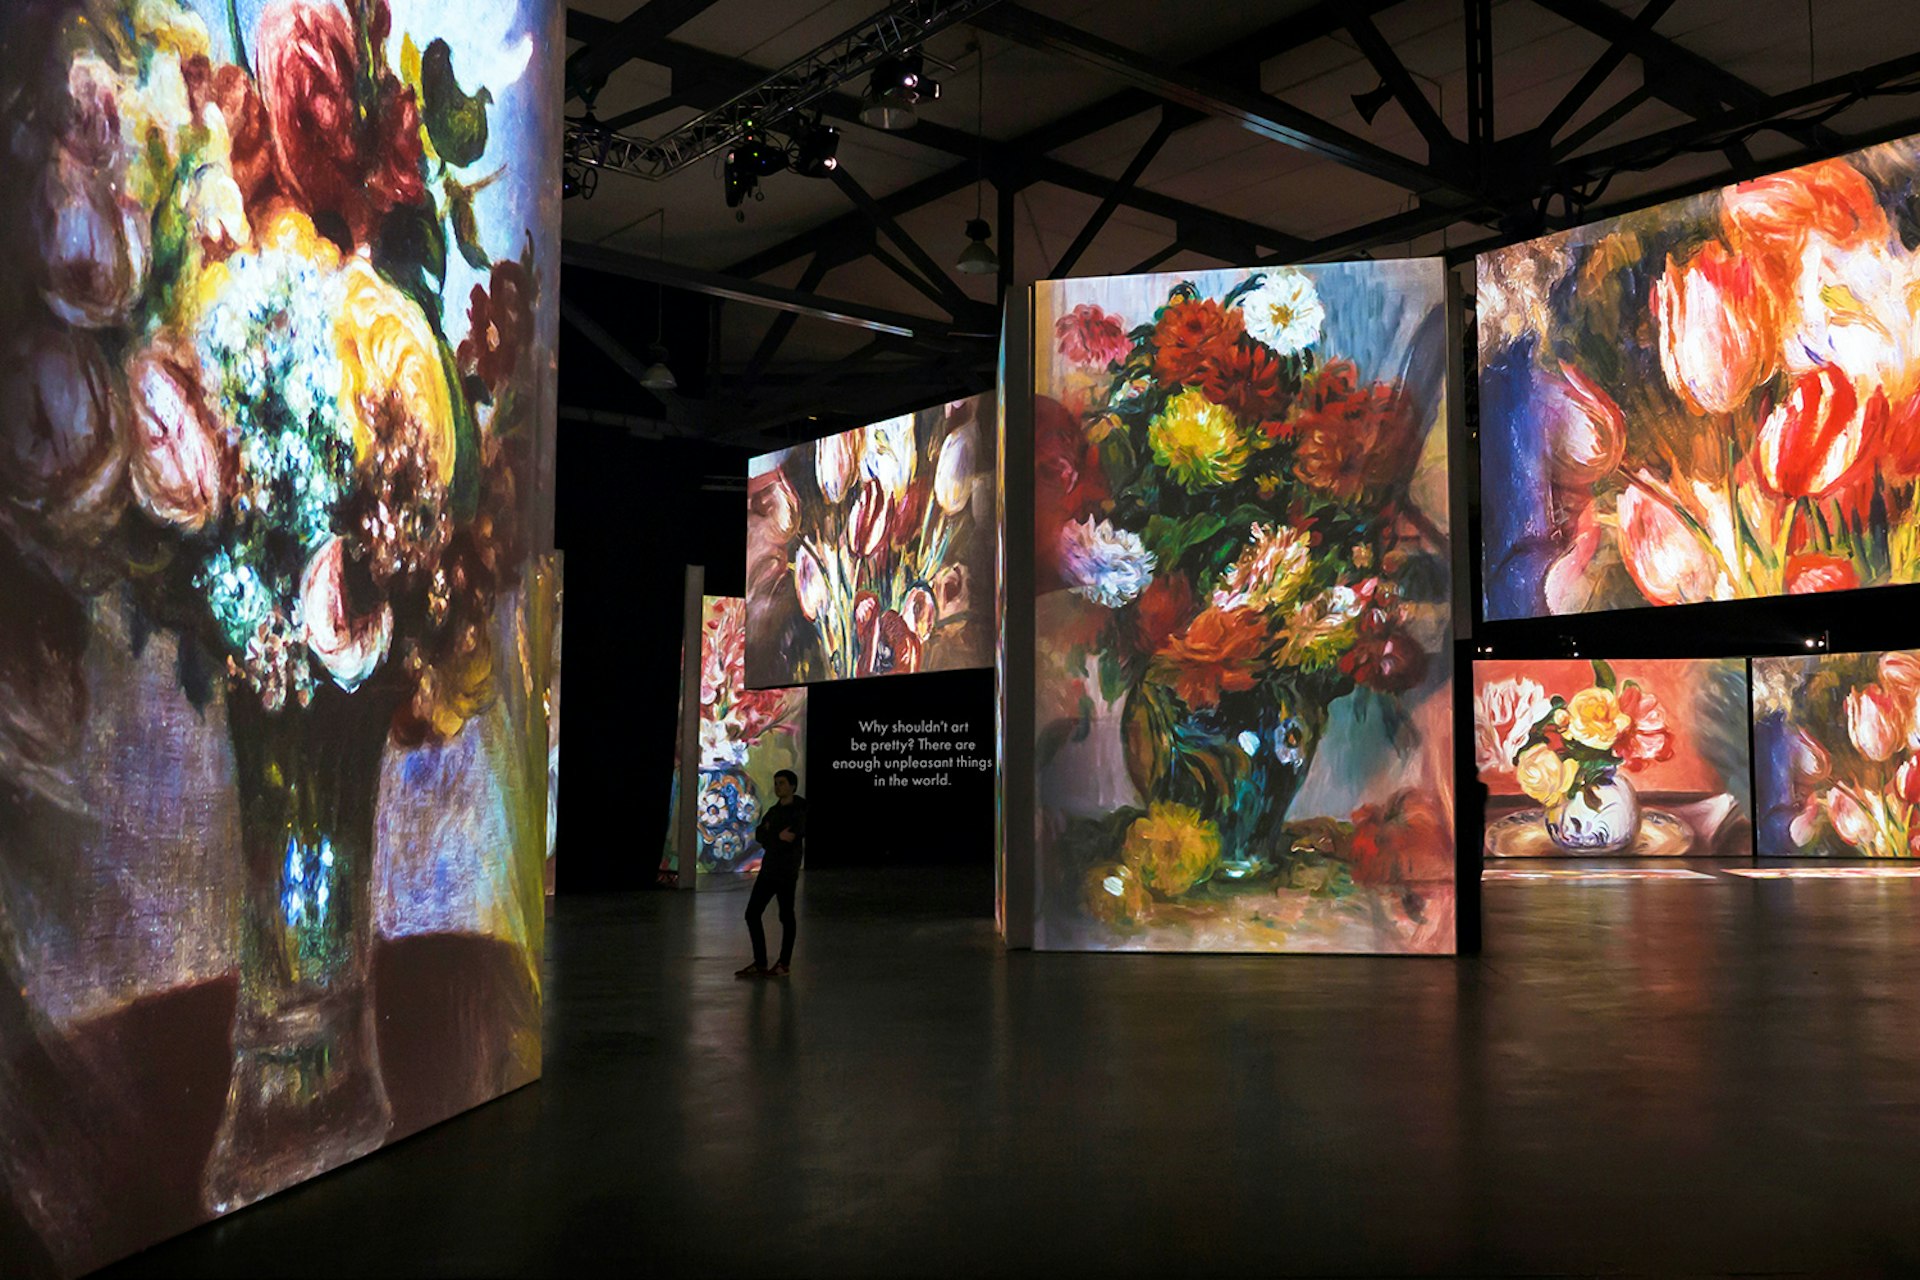 An installation at the Monet & Friends – Life, Light & Colour exhibition